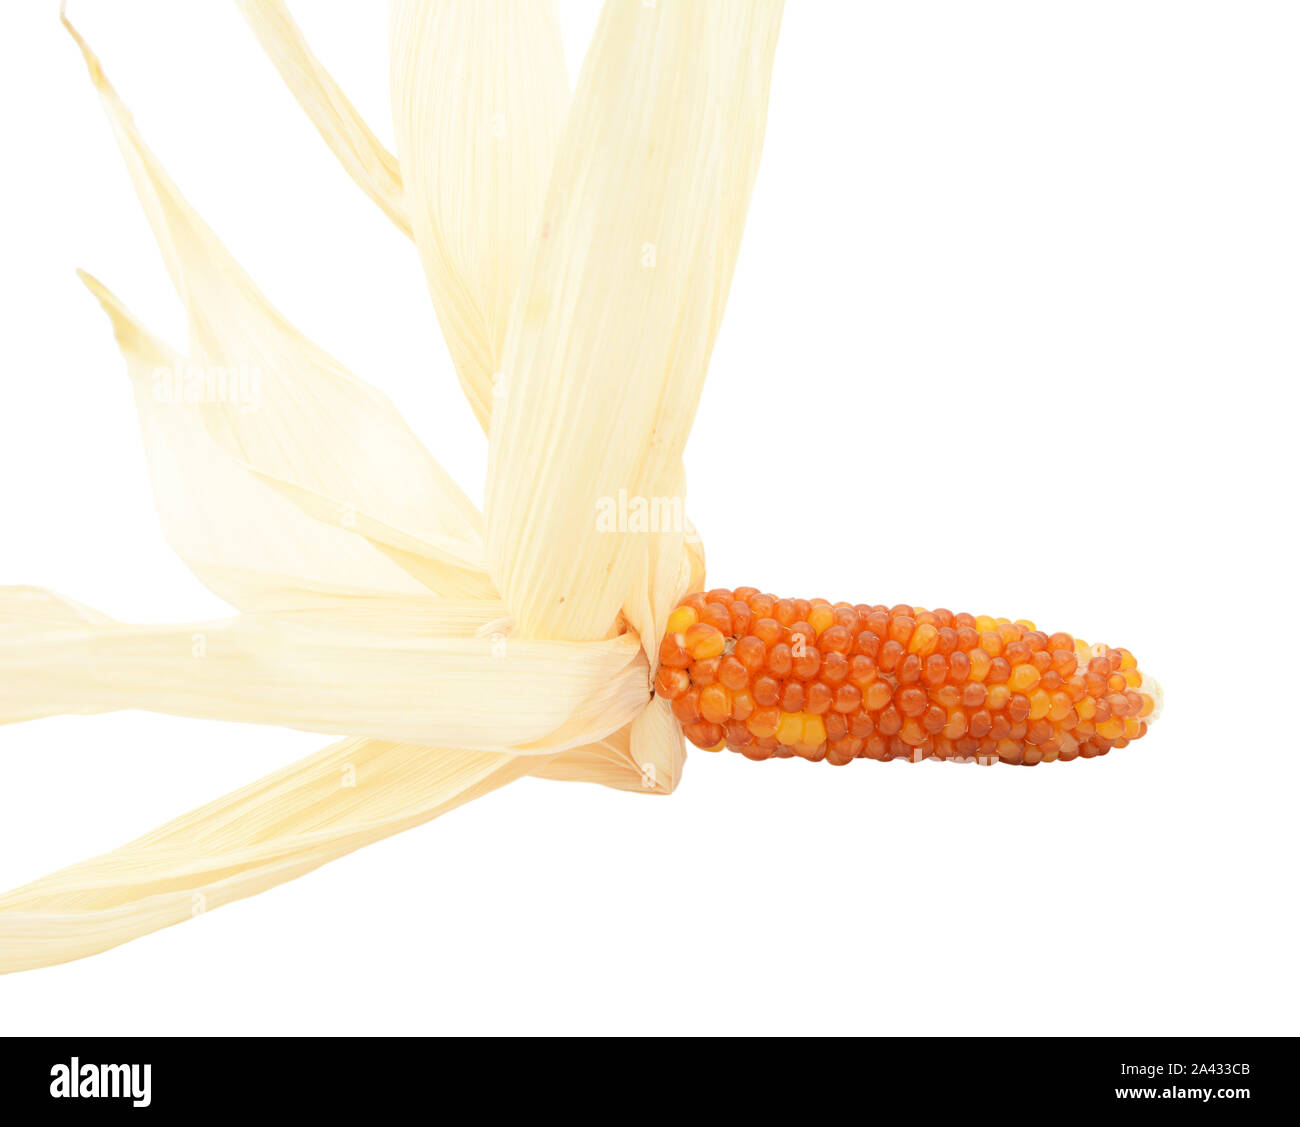 Close-up of ornamental Indian corn with red and orange niblets and dried husks, on a white background Stock Photo